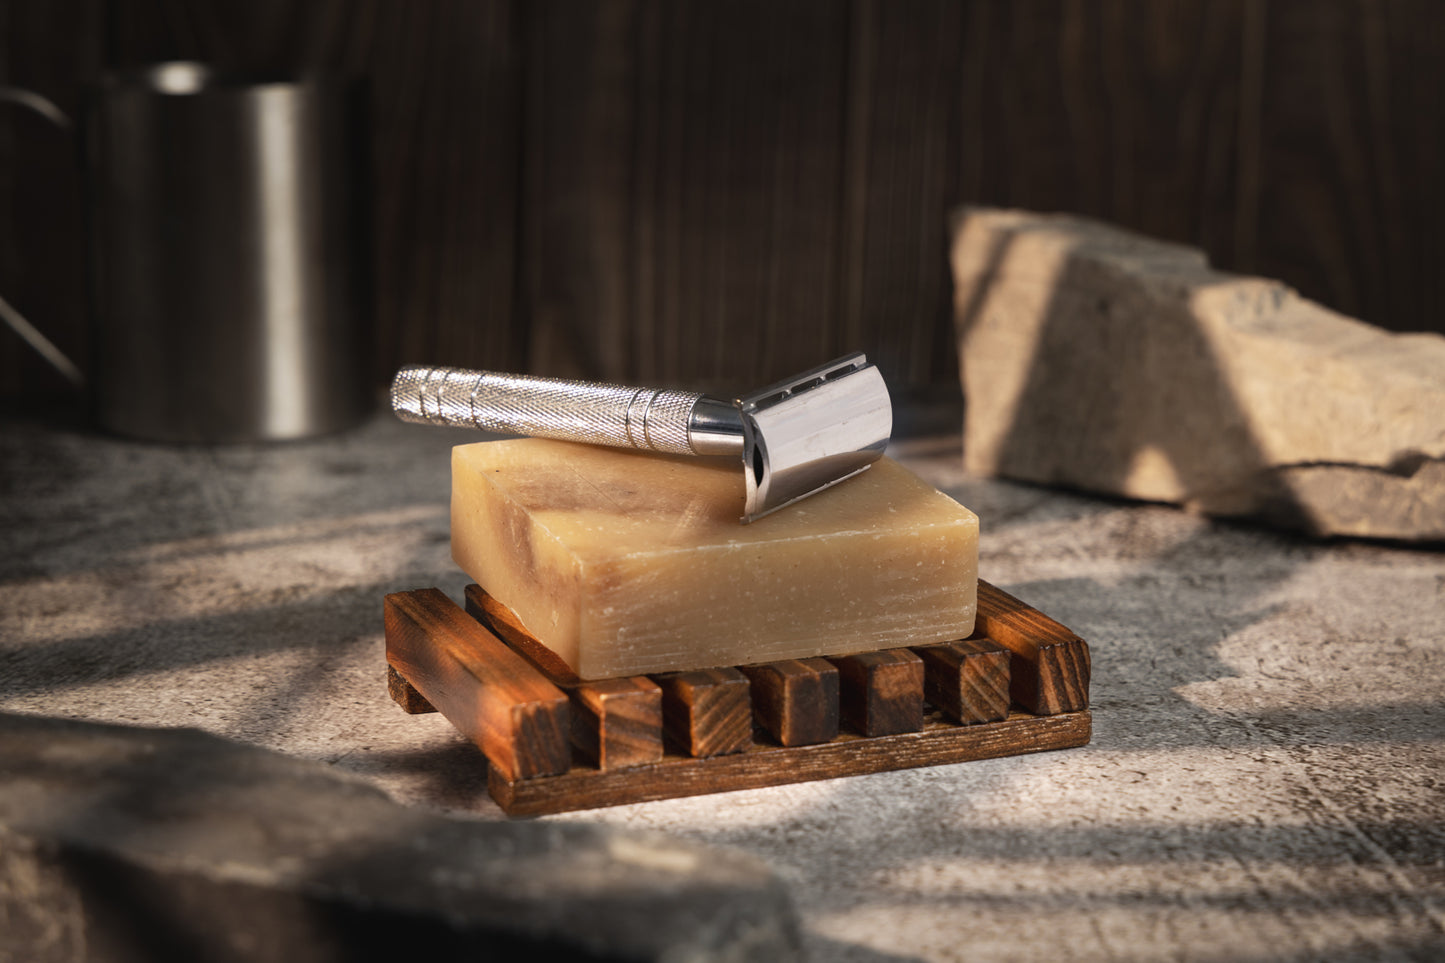 This image shows the Desesh premium quality solid body and face shave soap bar as an alternative to cans of shave foam or cream. This is a more eco friendly sustainable zero waste option and the shave bars come in biodegradable packaging. Shown here is the metal safety razor placed on top of a shave soap bar and a wood soap rack